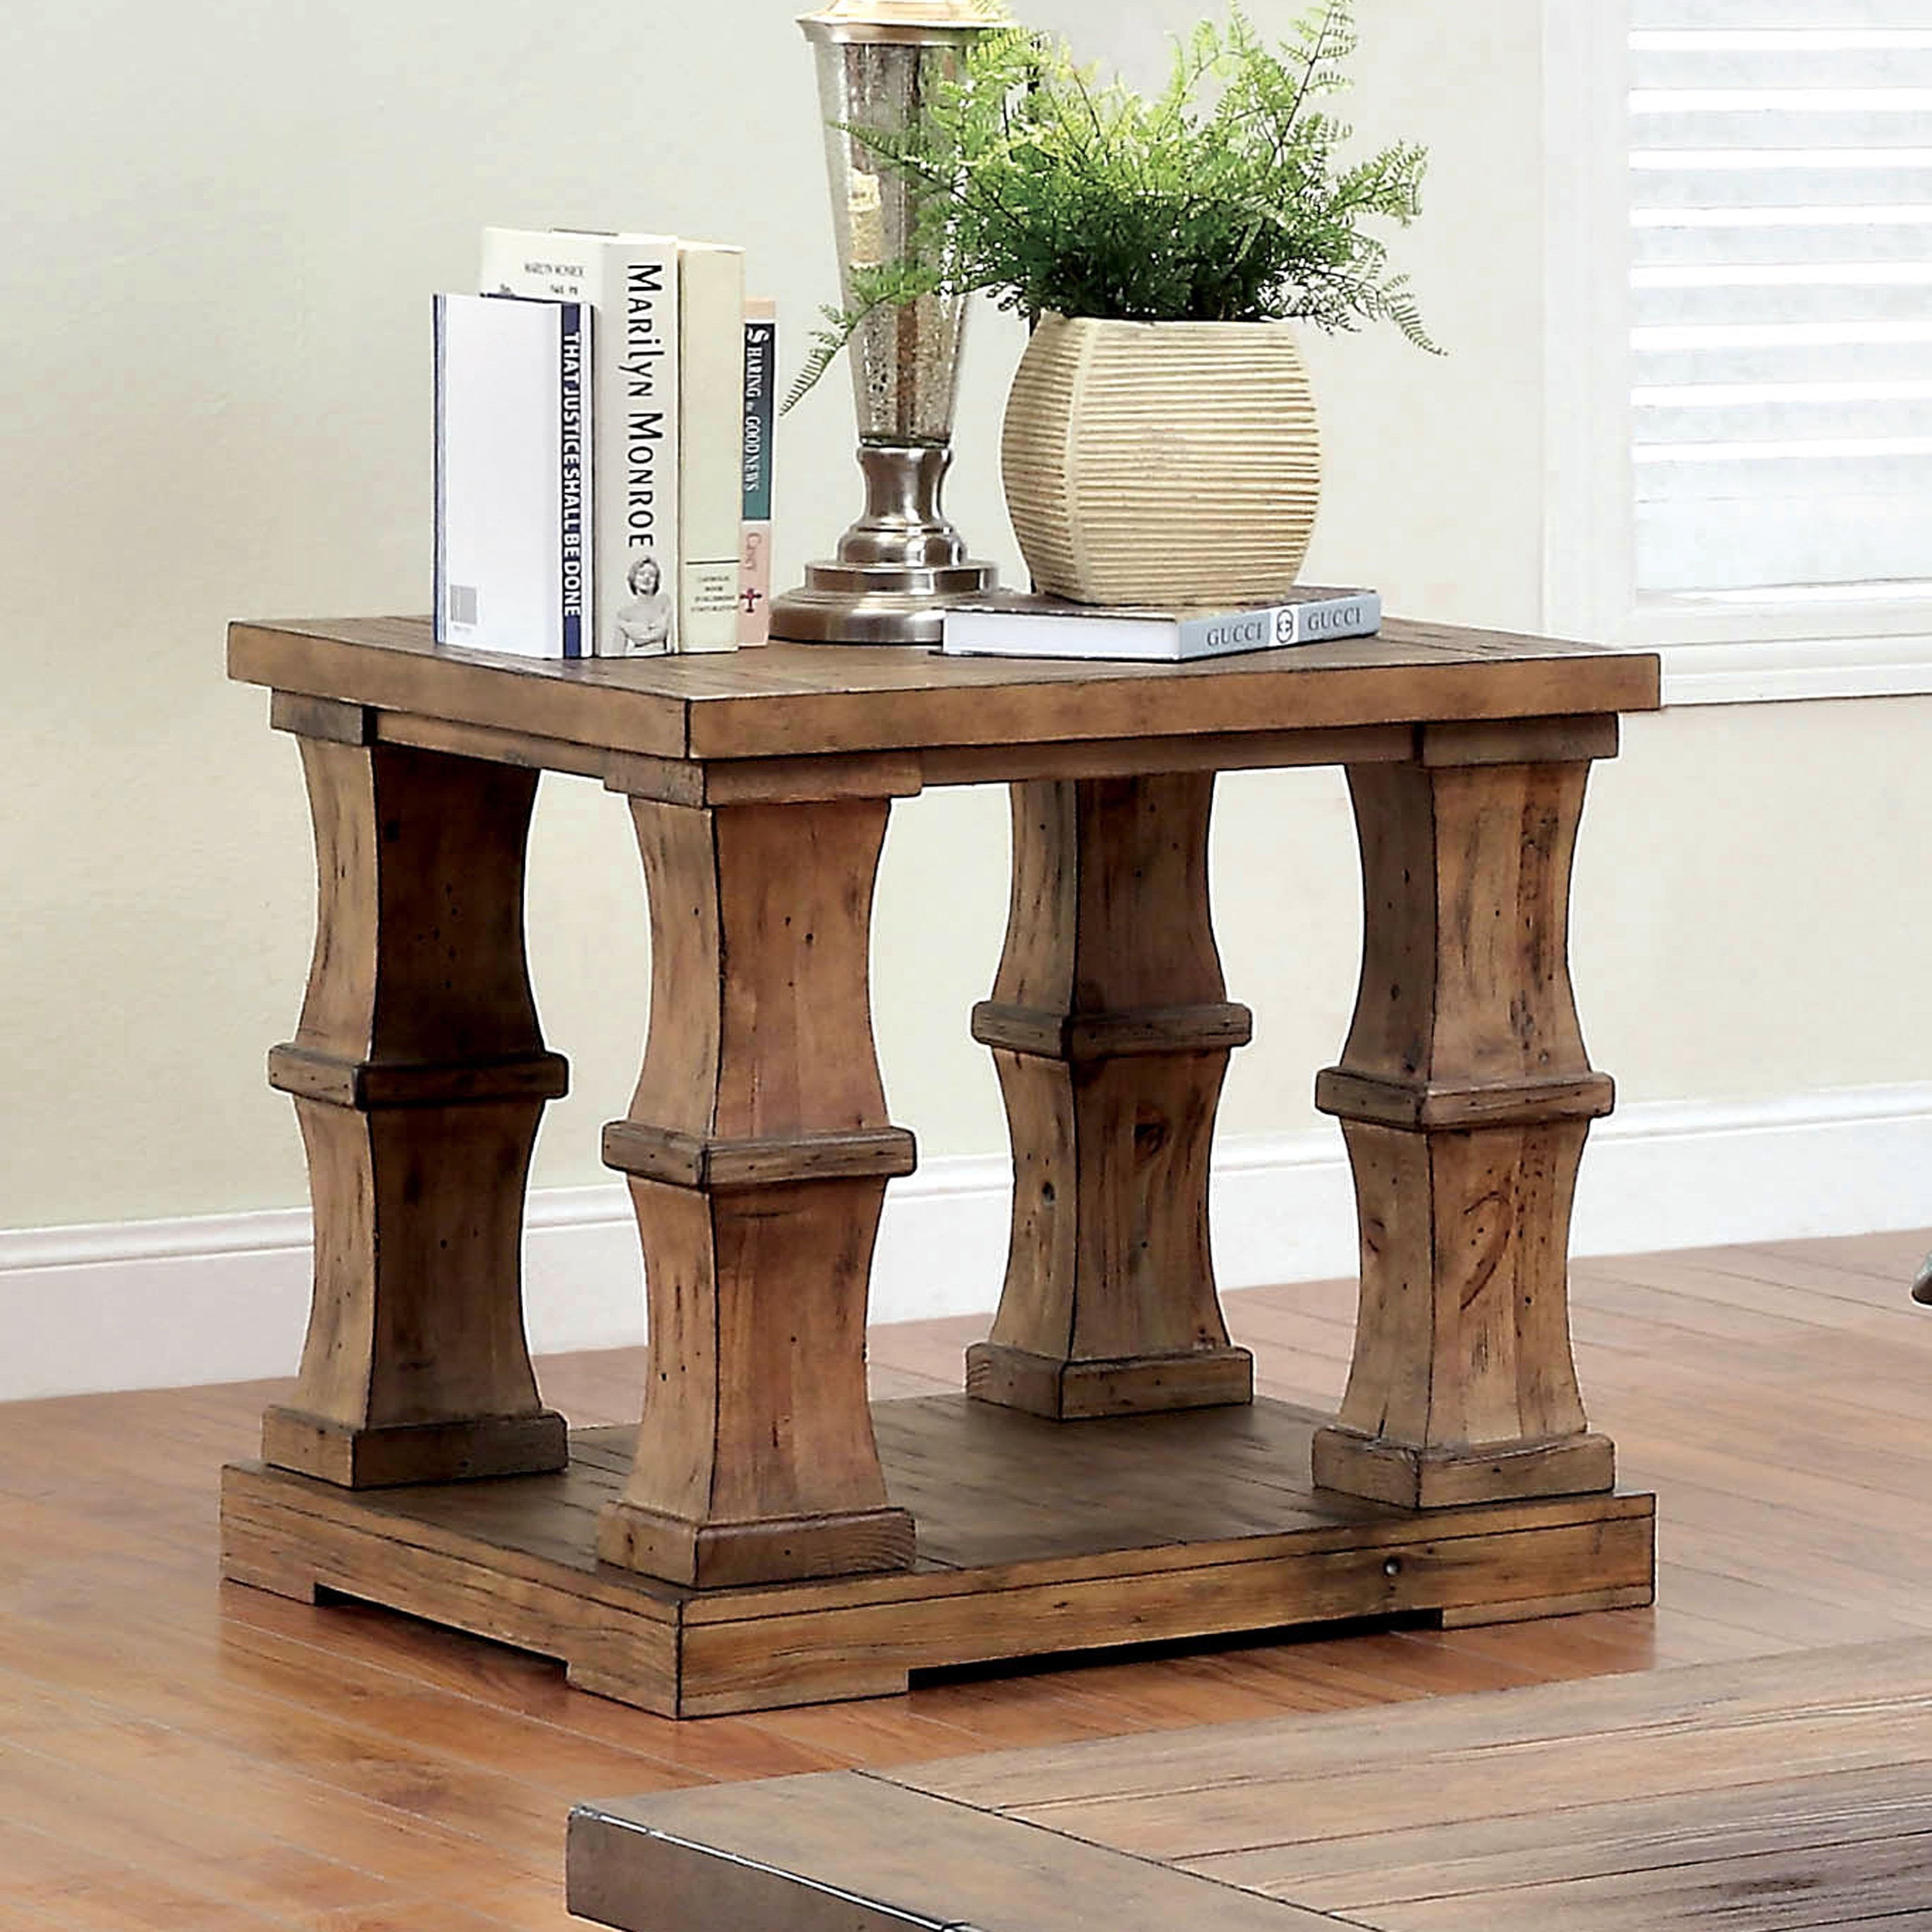 Furniture of America Temecula Rustic Brown Solid Wood Square End Table